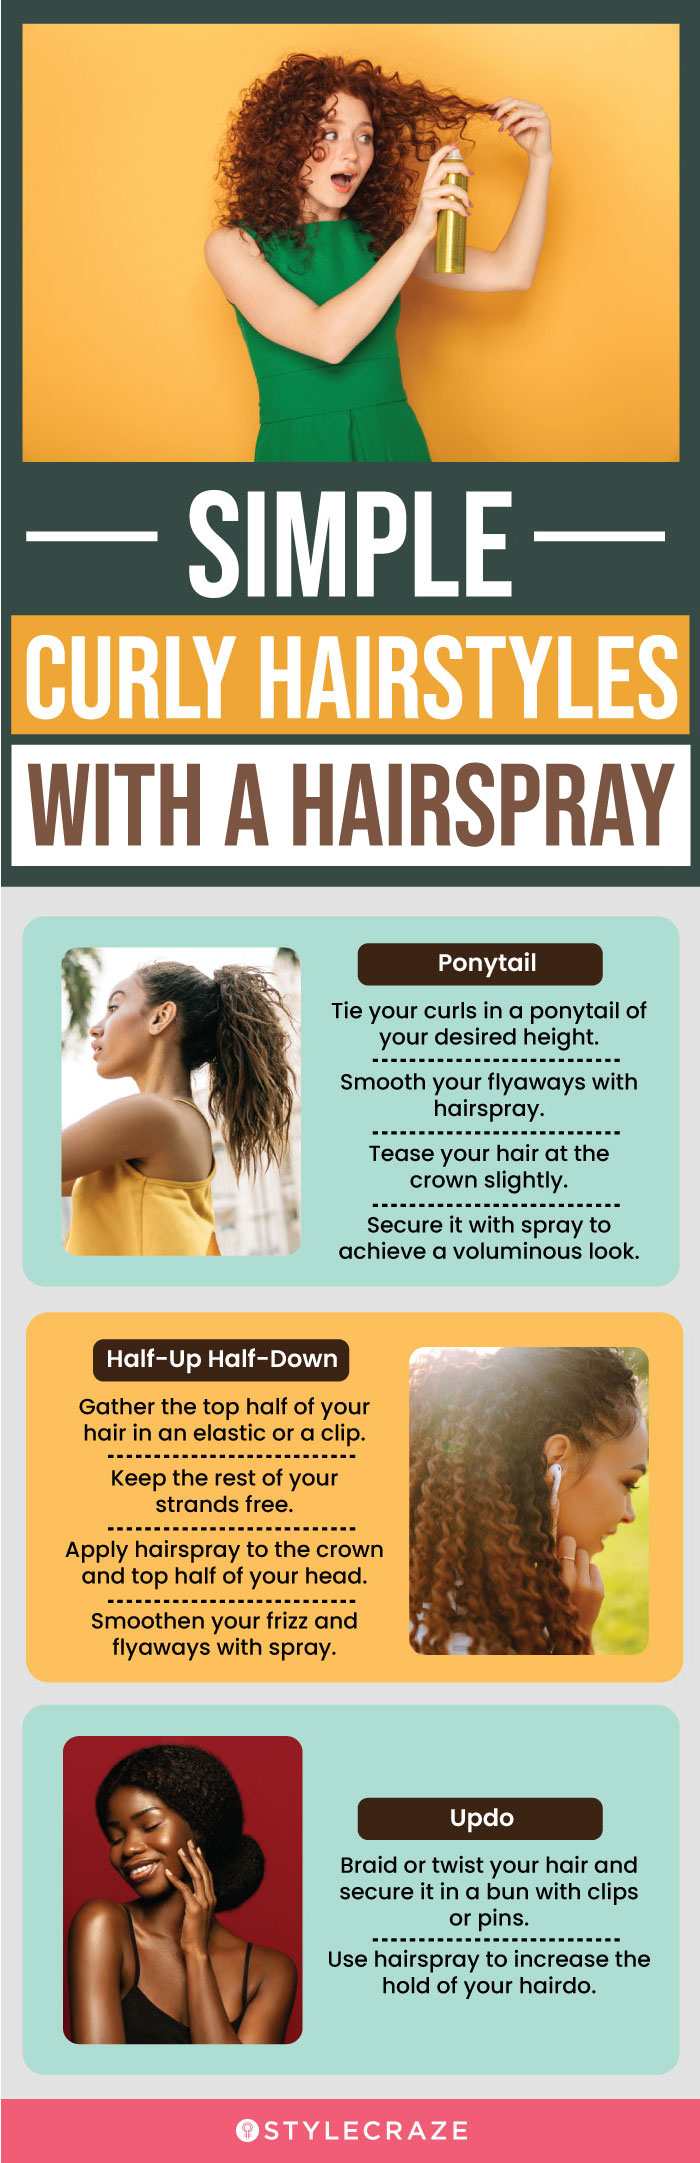 Simple Curly Hairstyles With A Hairspray (infographic)